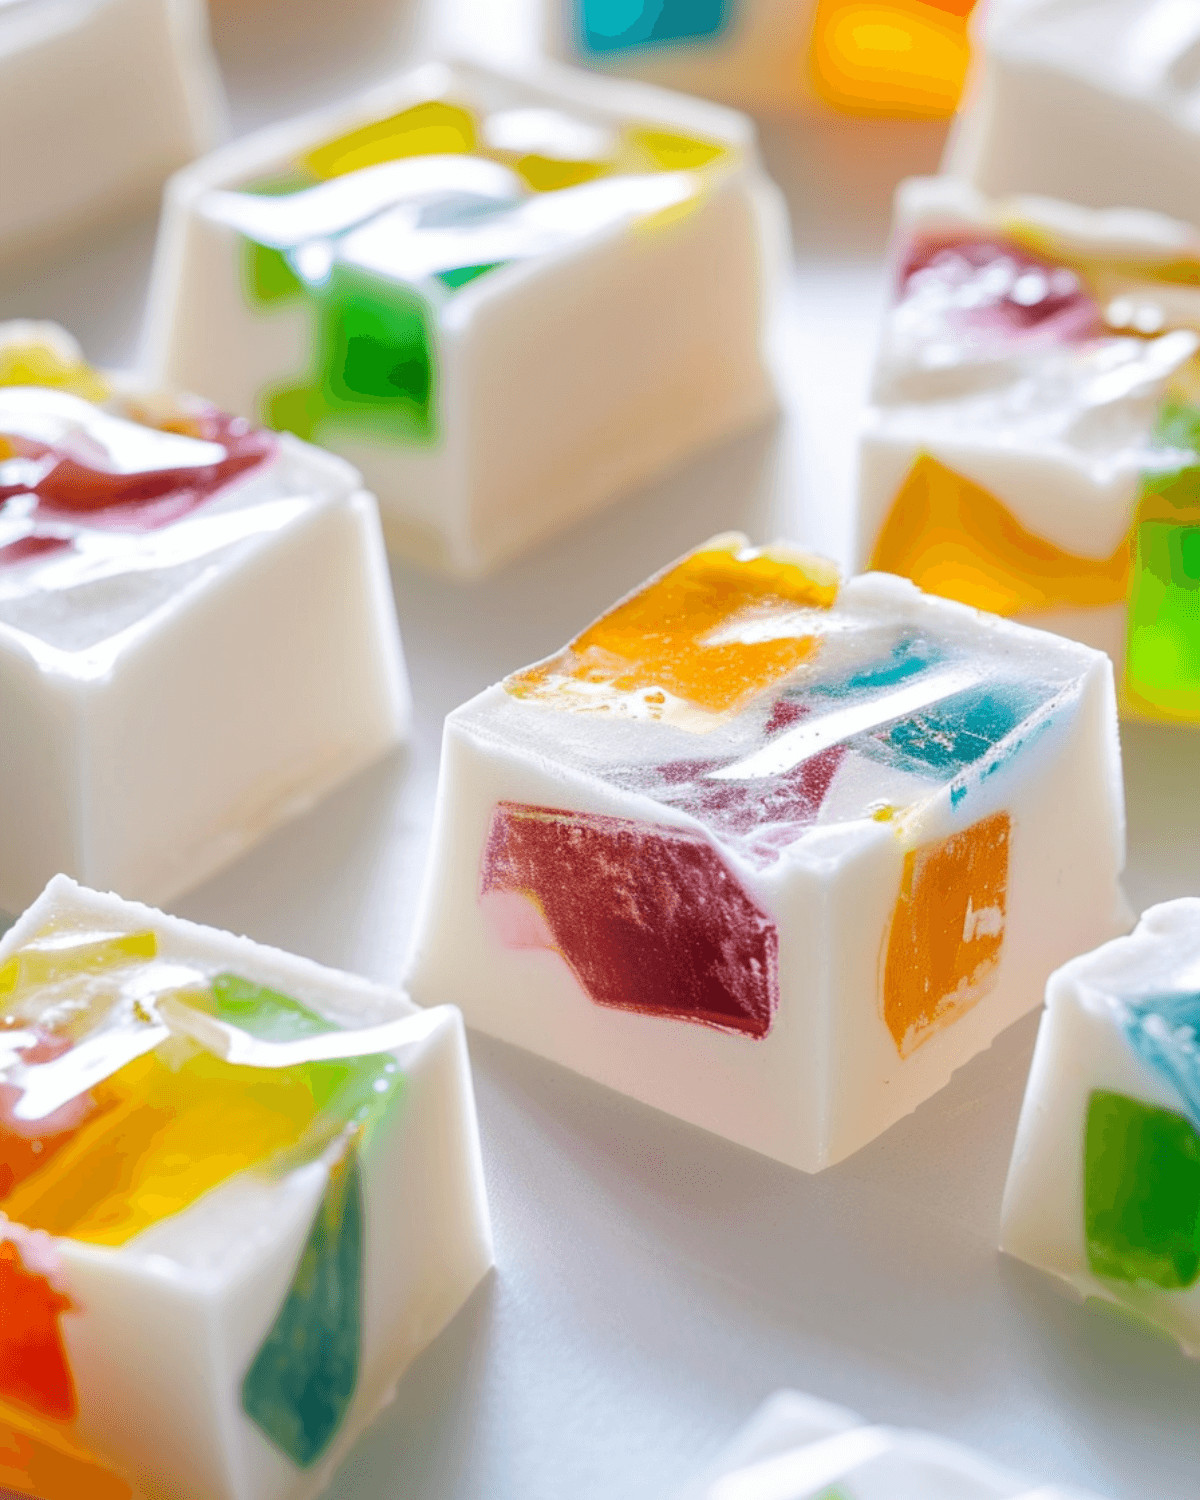 Mosaic-inspired gummy jello squares on a white surface.